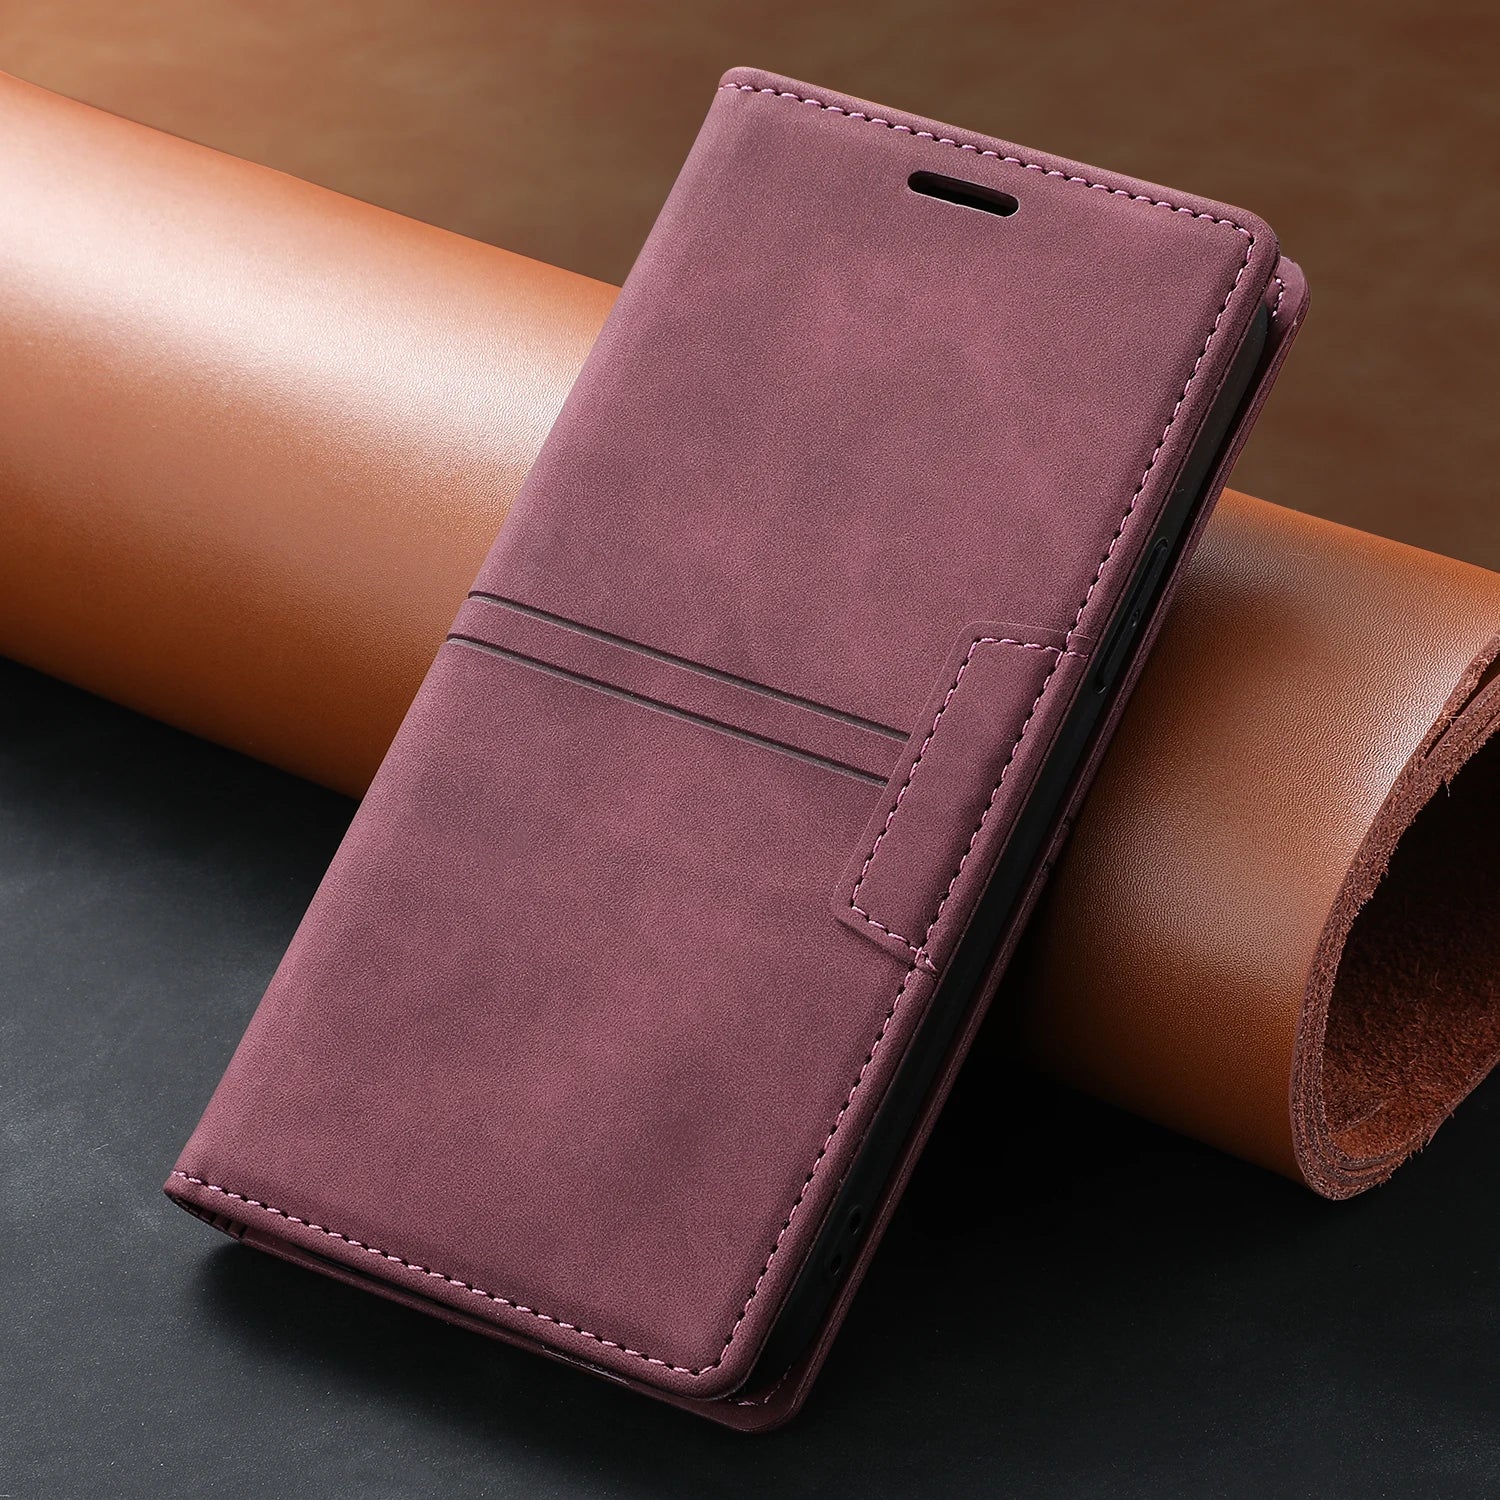 Wallet Leather Flip Galaxy A, F and M Case - DealJustDeal